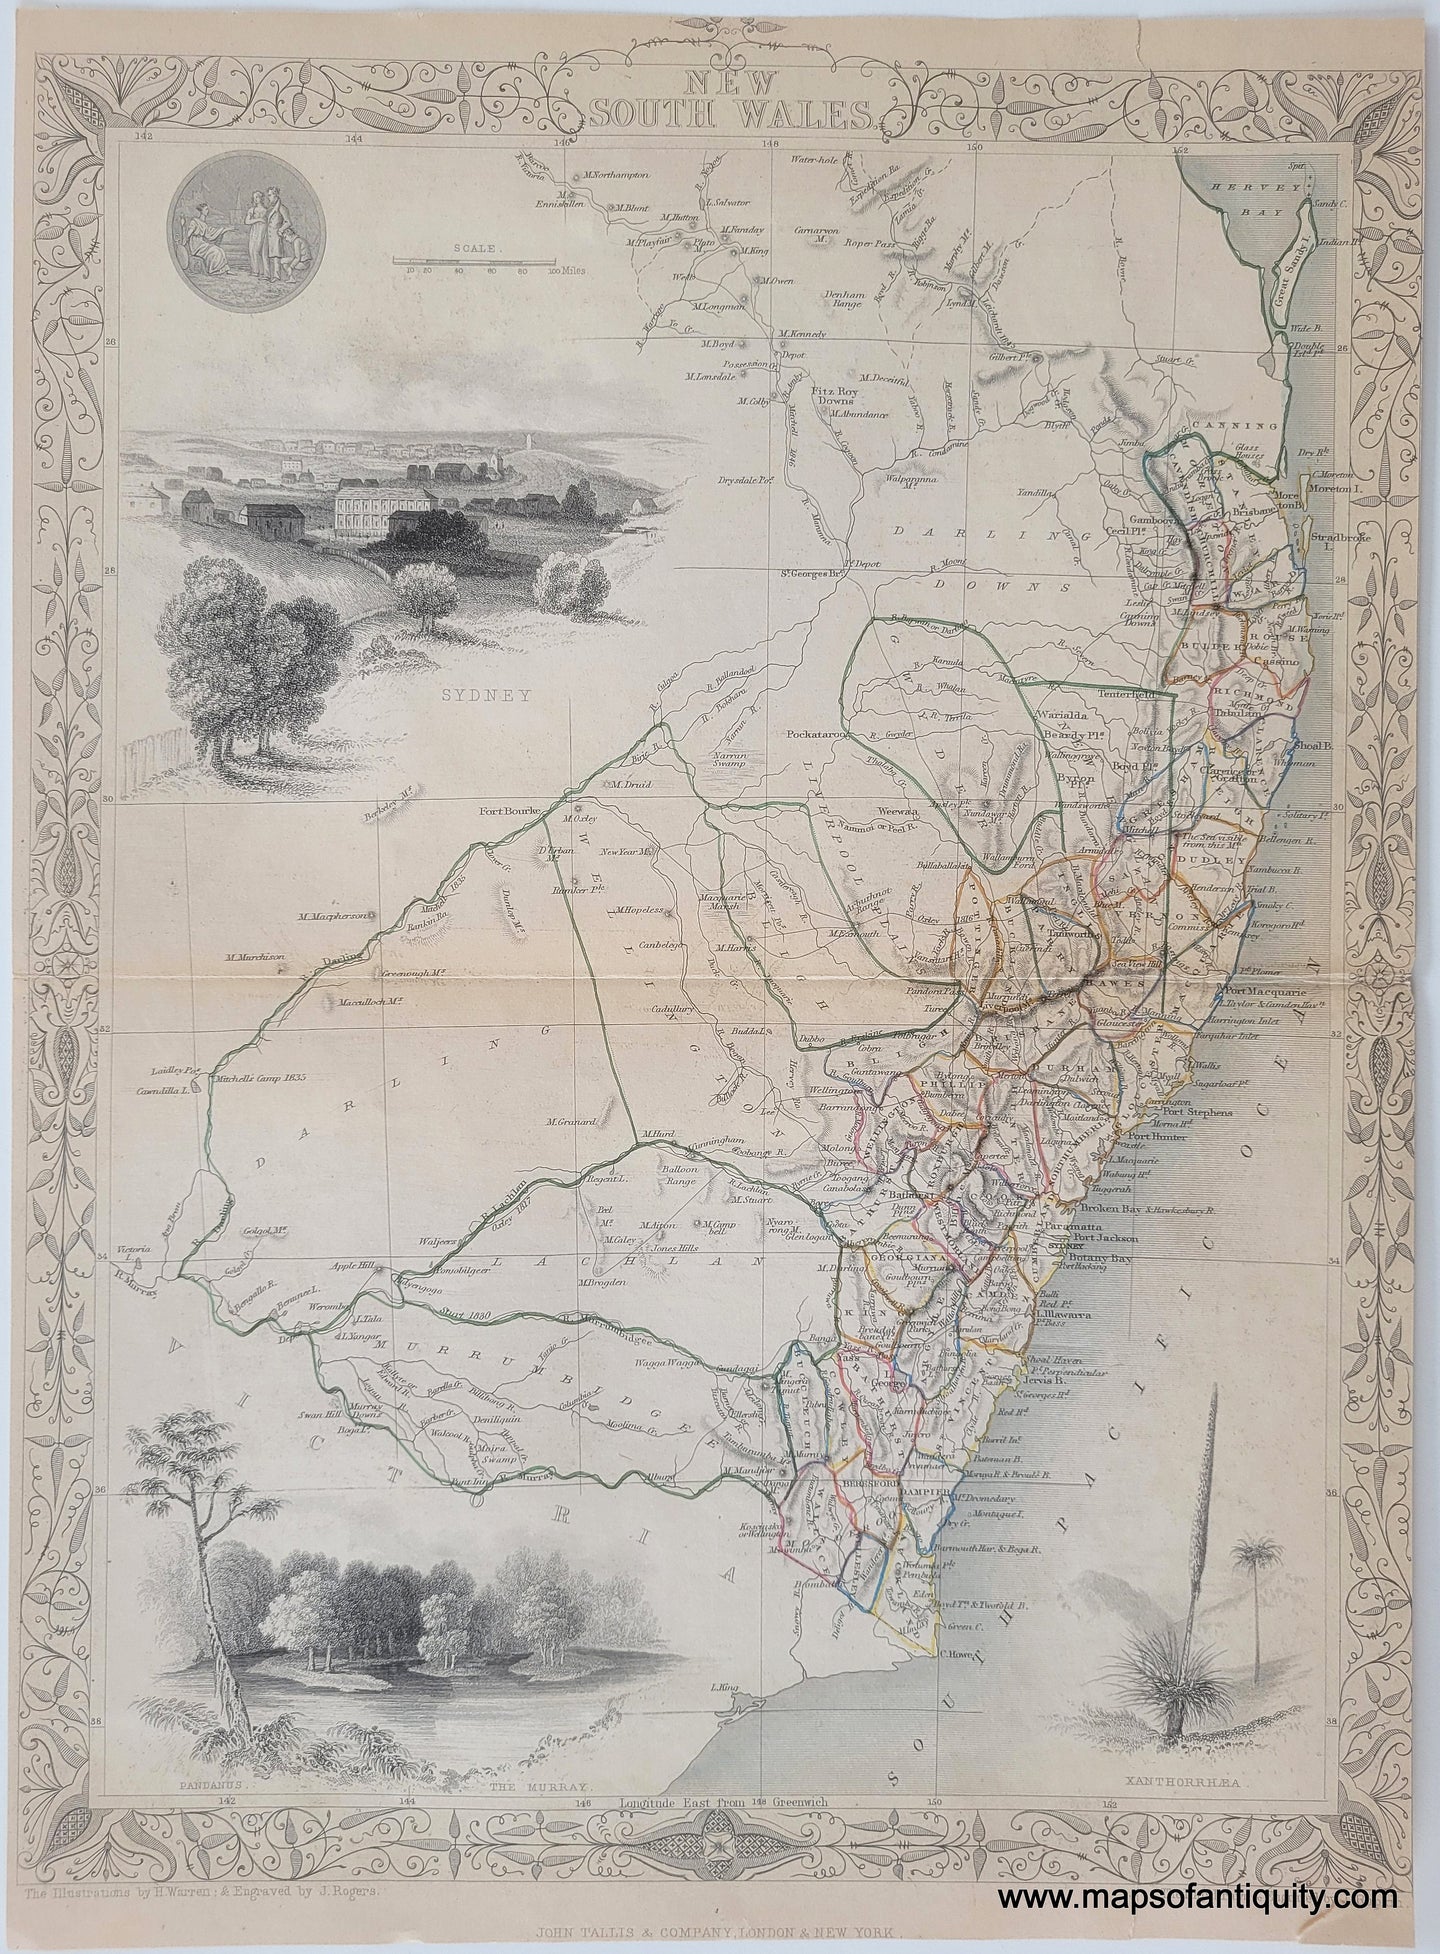 1851 - New South Wales - Antique Map